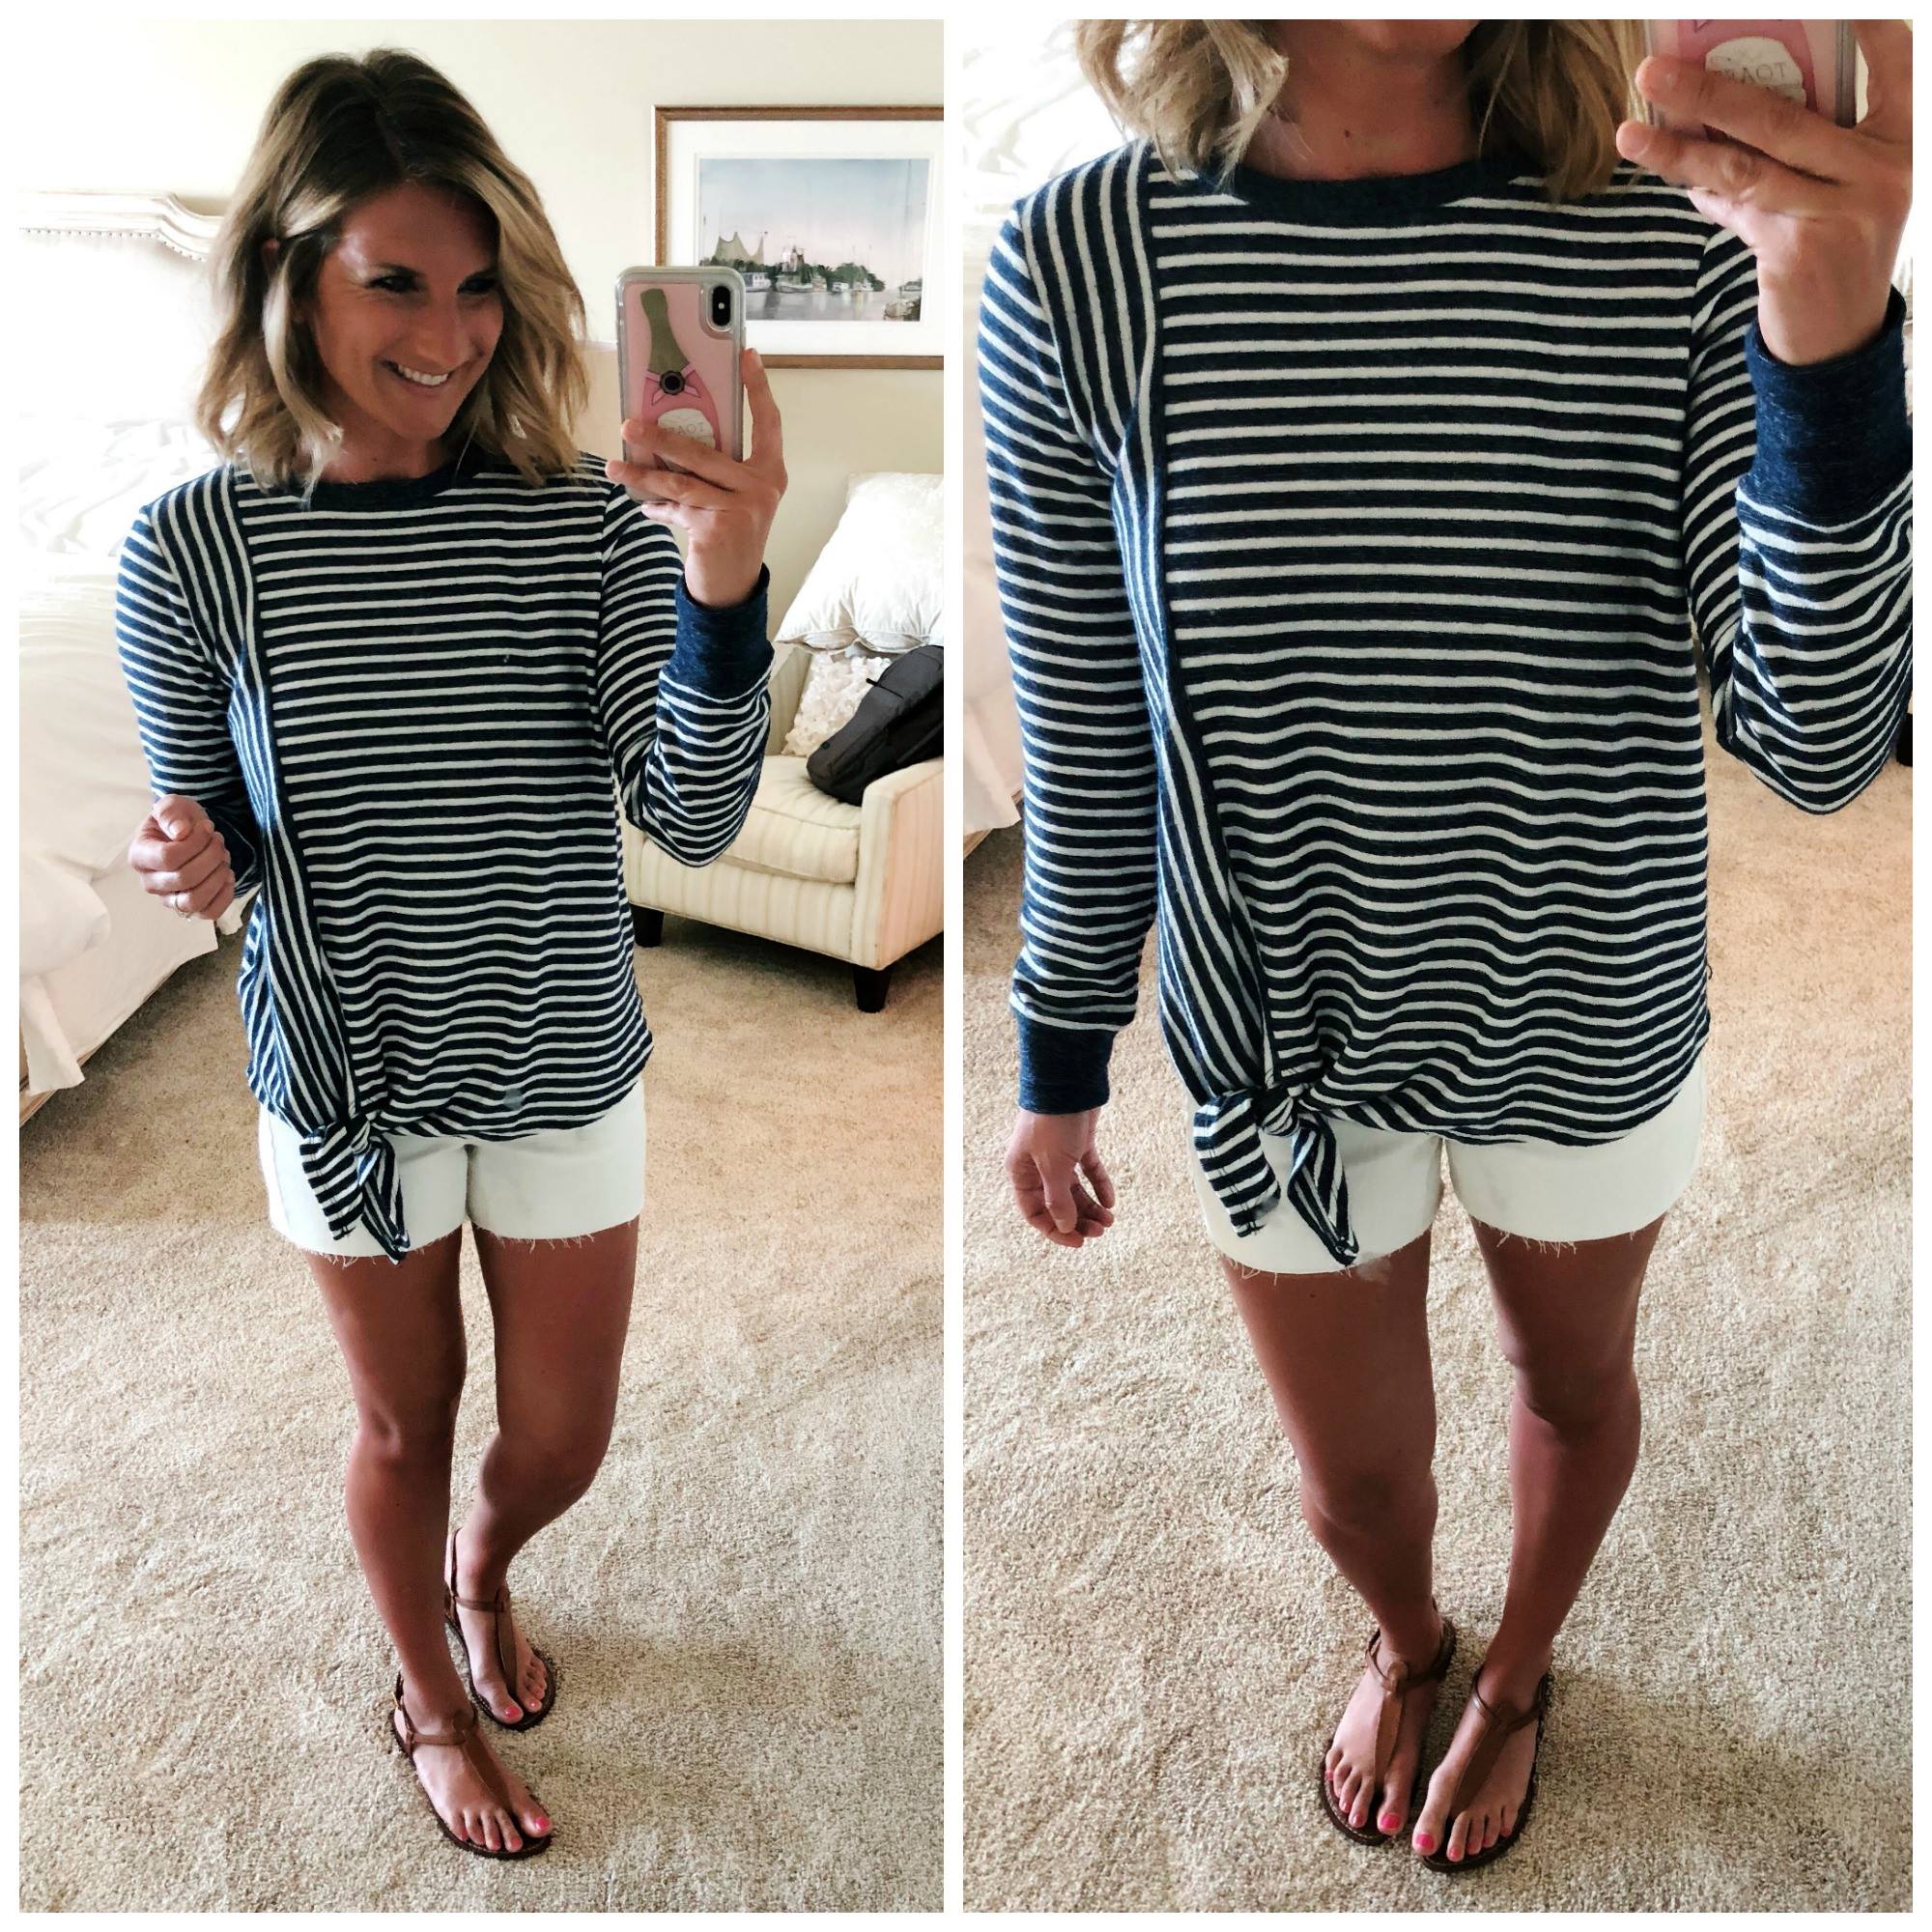 Cute Vacation Outfit // Navy and White Striped Top + Released Hem Shorts + Sandals // Summer Fashion